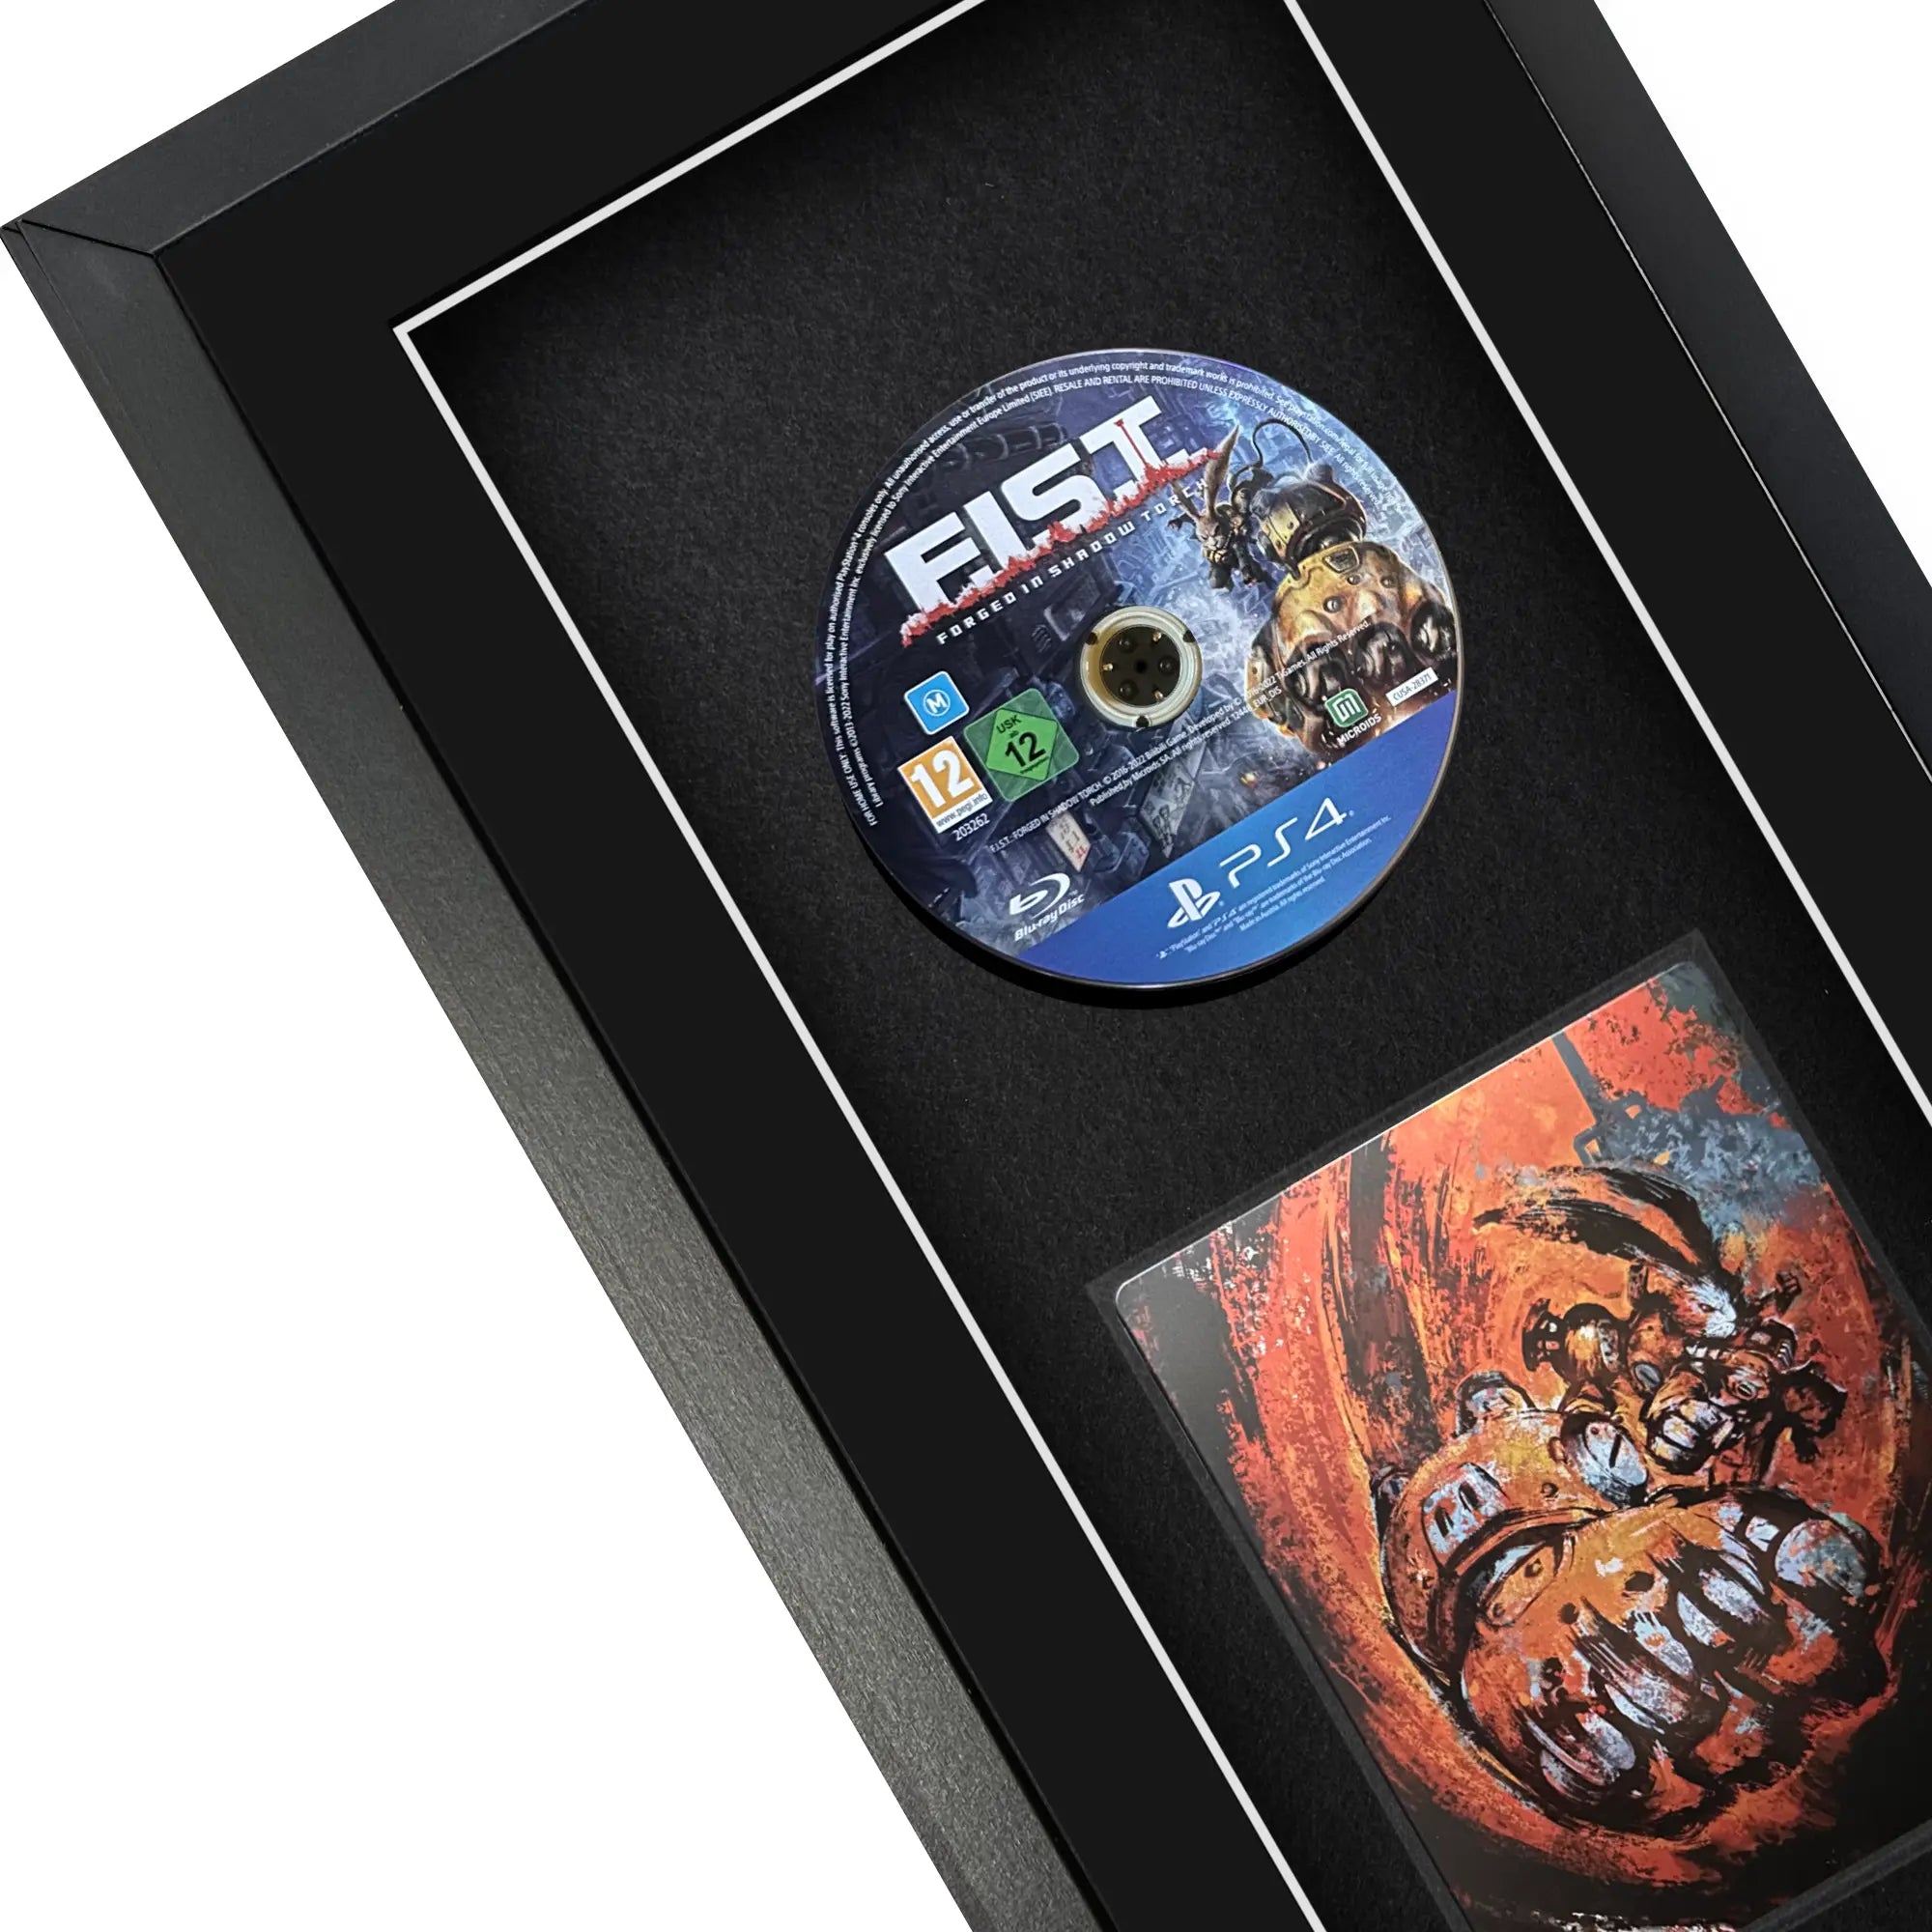 Frame your own PlayStation 3, 4, or 5 steelbook game to be displayed within this frame, the perfect way to showcase your game